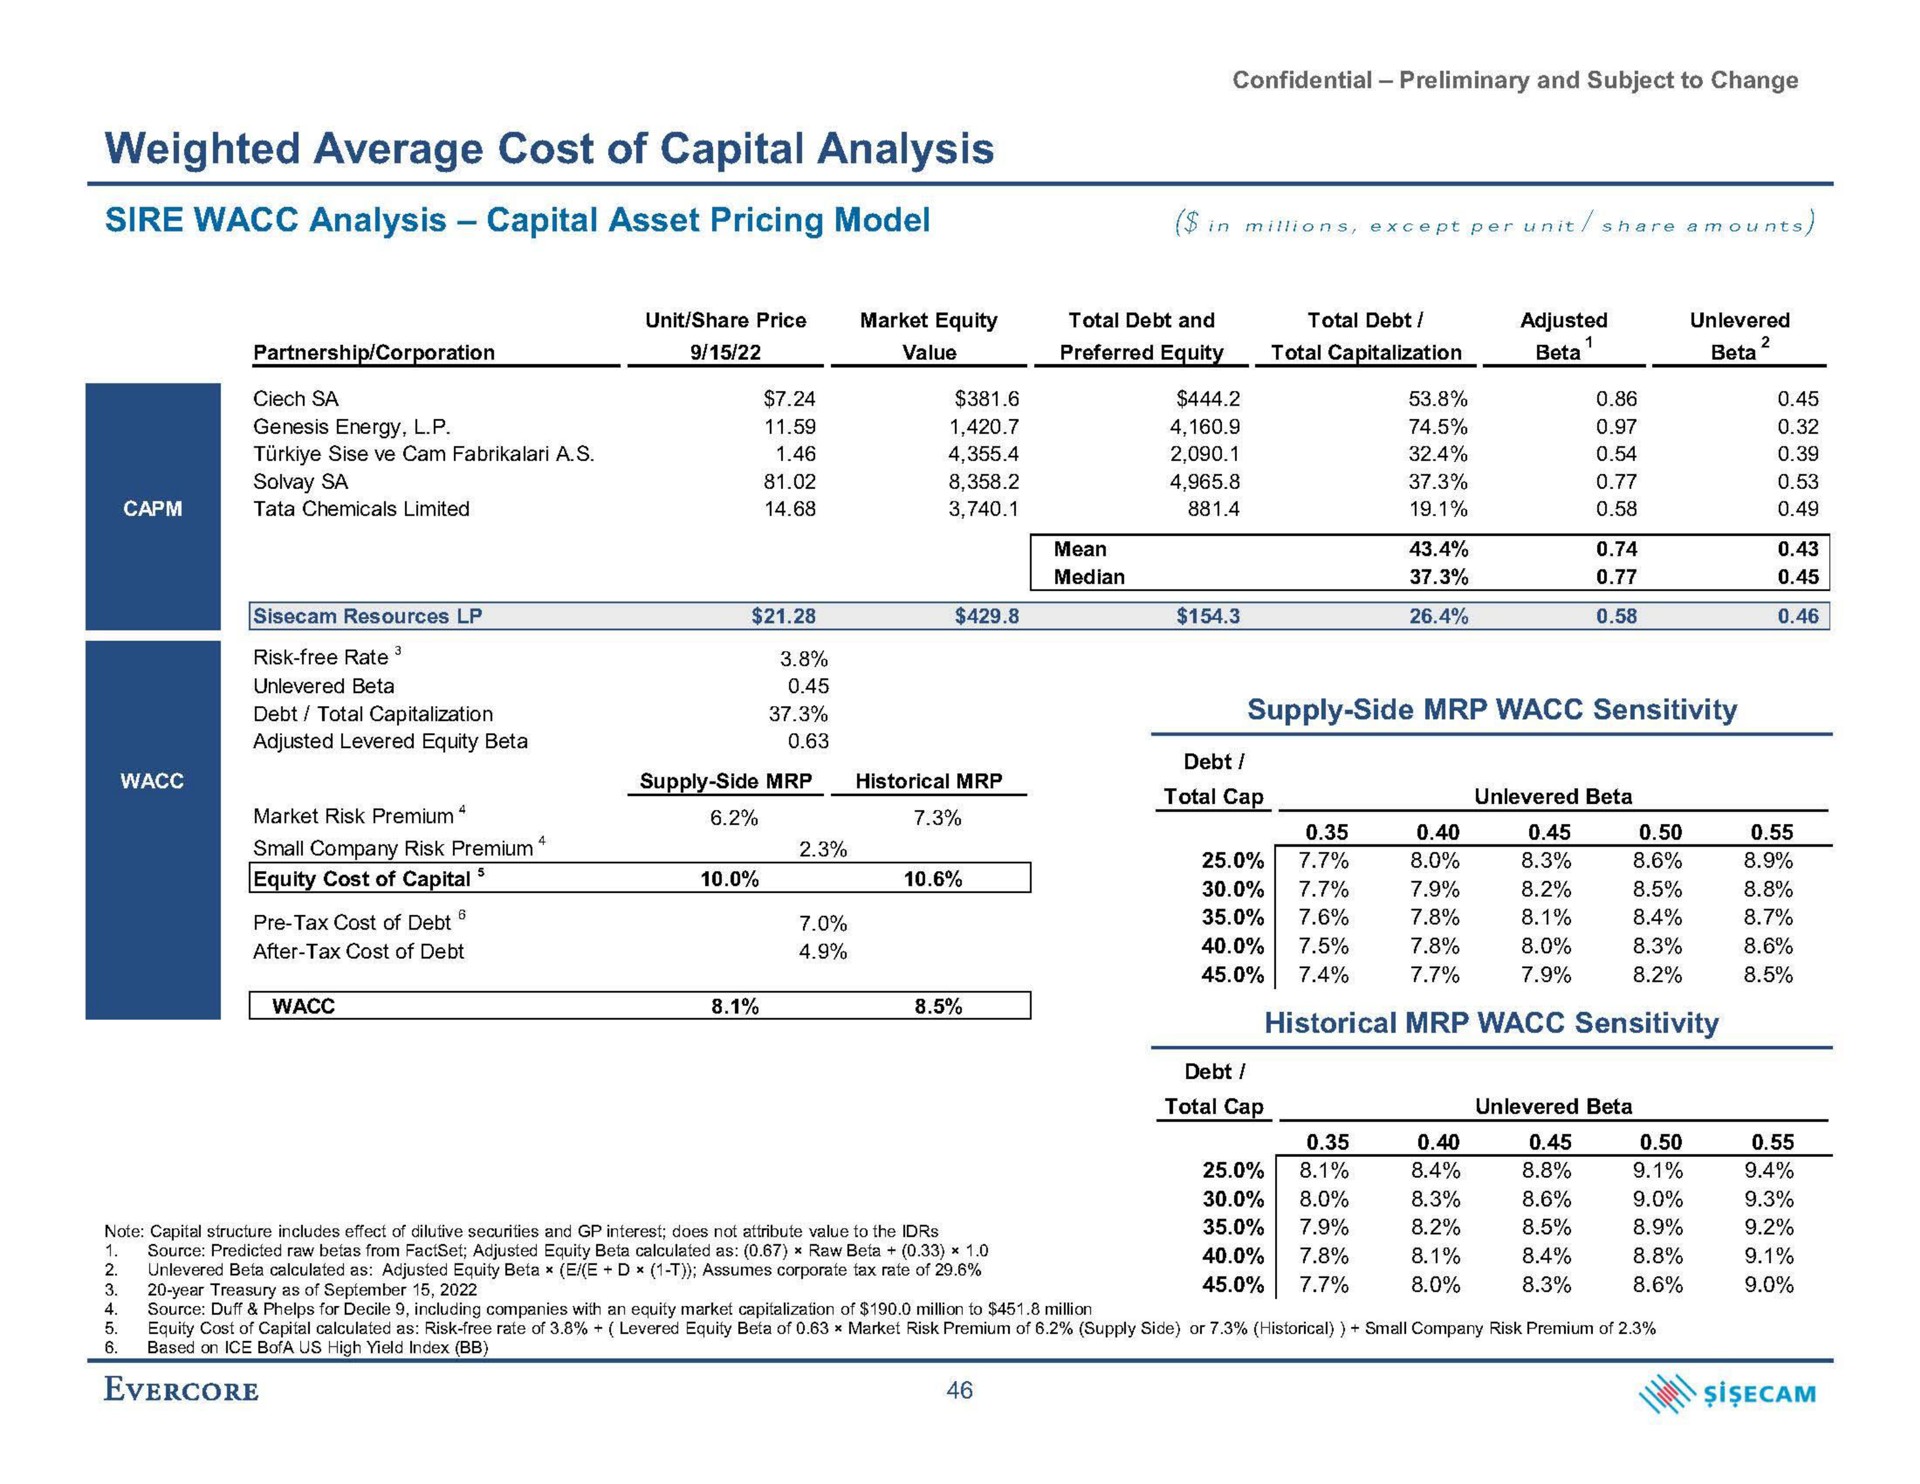 weighted average cost of capital analysis historical sensitivity | Evercore